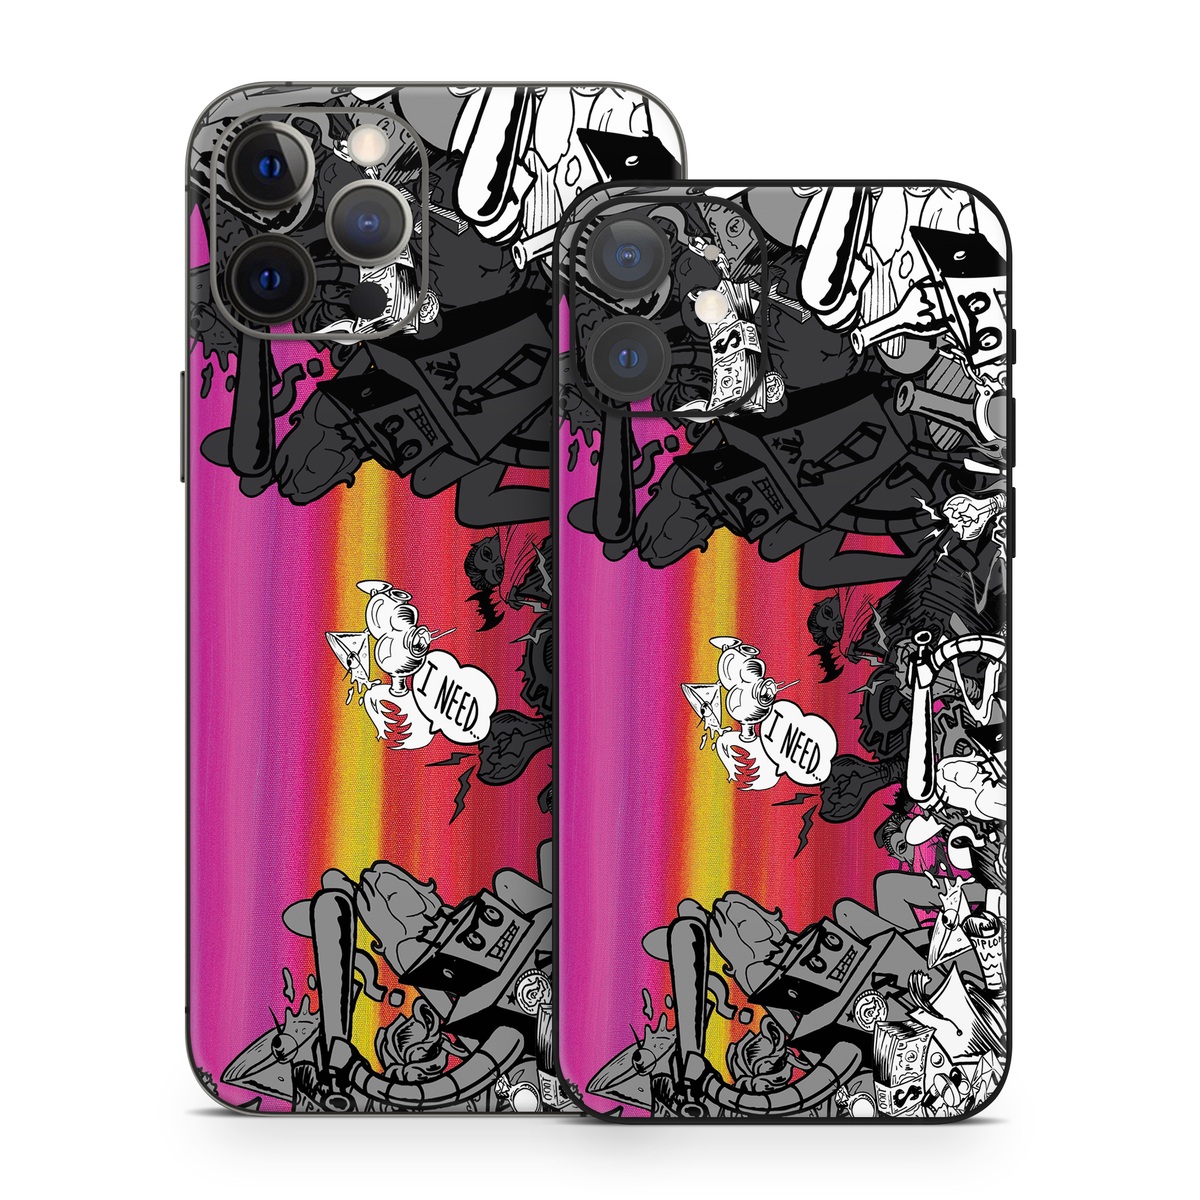 iPhone 12 Series Skin design of Cartoon, Illustration, Graphic design, Fiction, Fictional character, Font, Comics, Art, Drawing, Graphics, with black, gray, purple, white, red, green colors